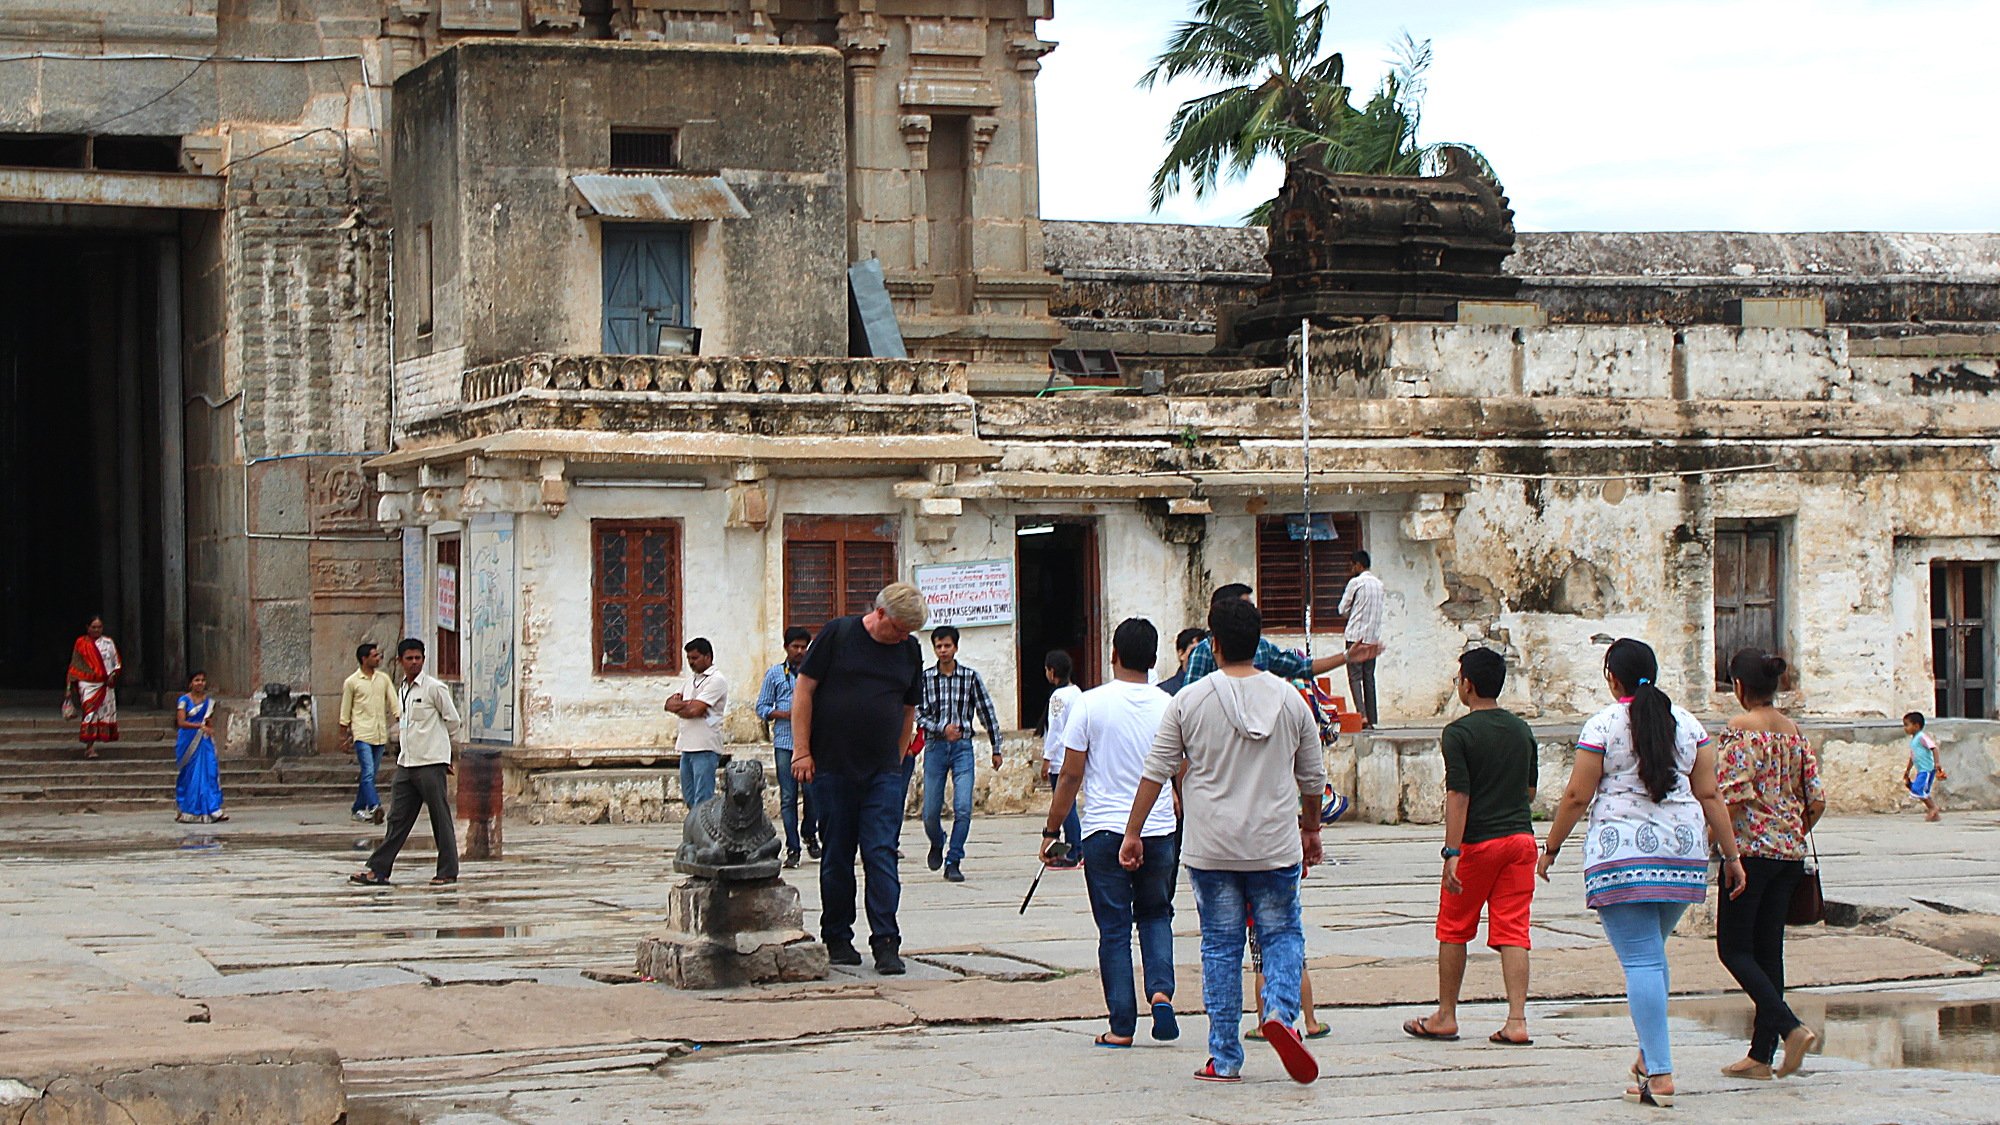 Tourists in the yard of the Virupaksha Temple.